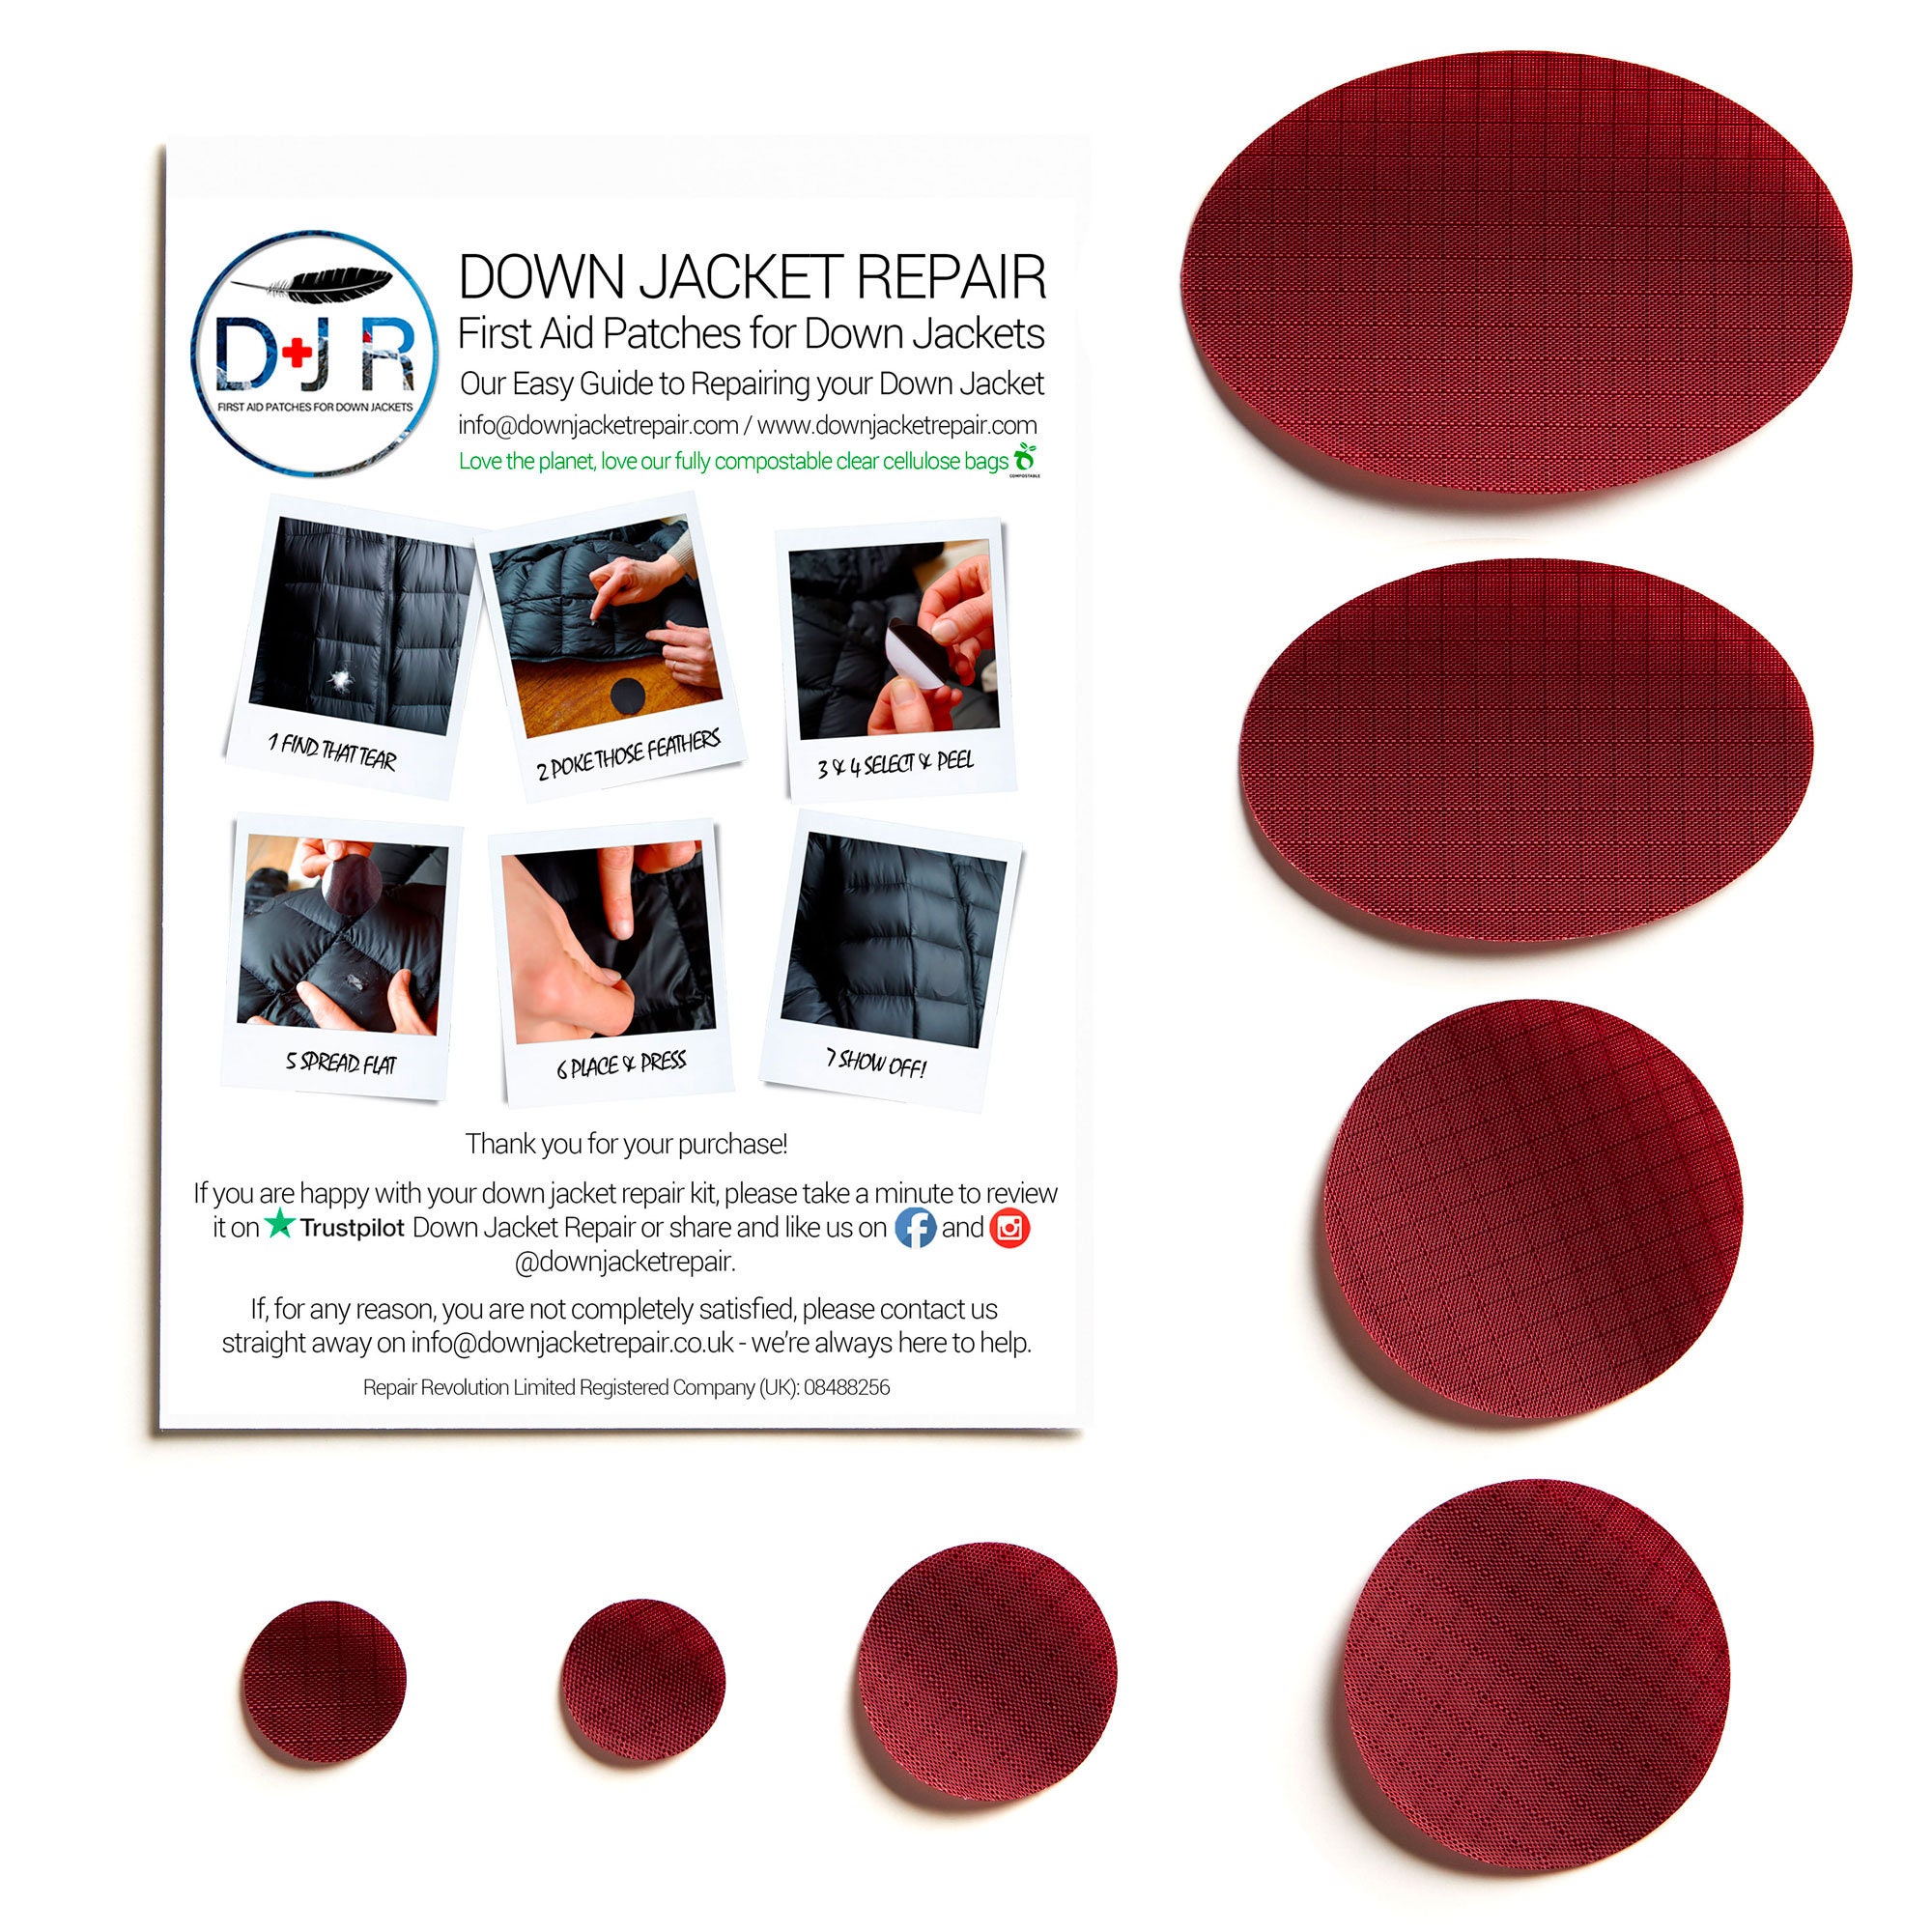 Pro-Fix Self-Adhesive Down Jacket Repair Patches - Burgundy 